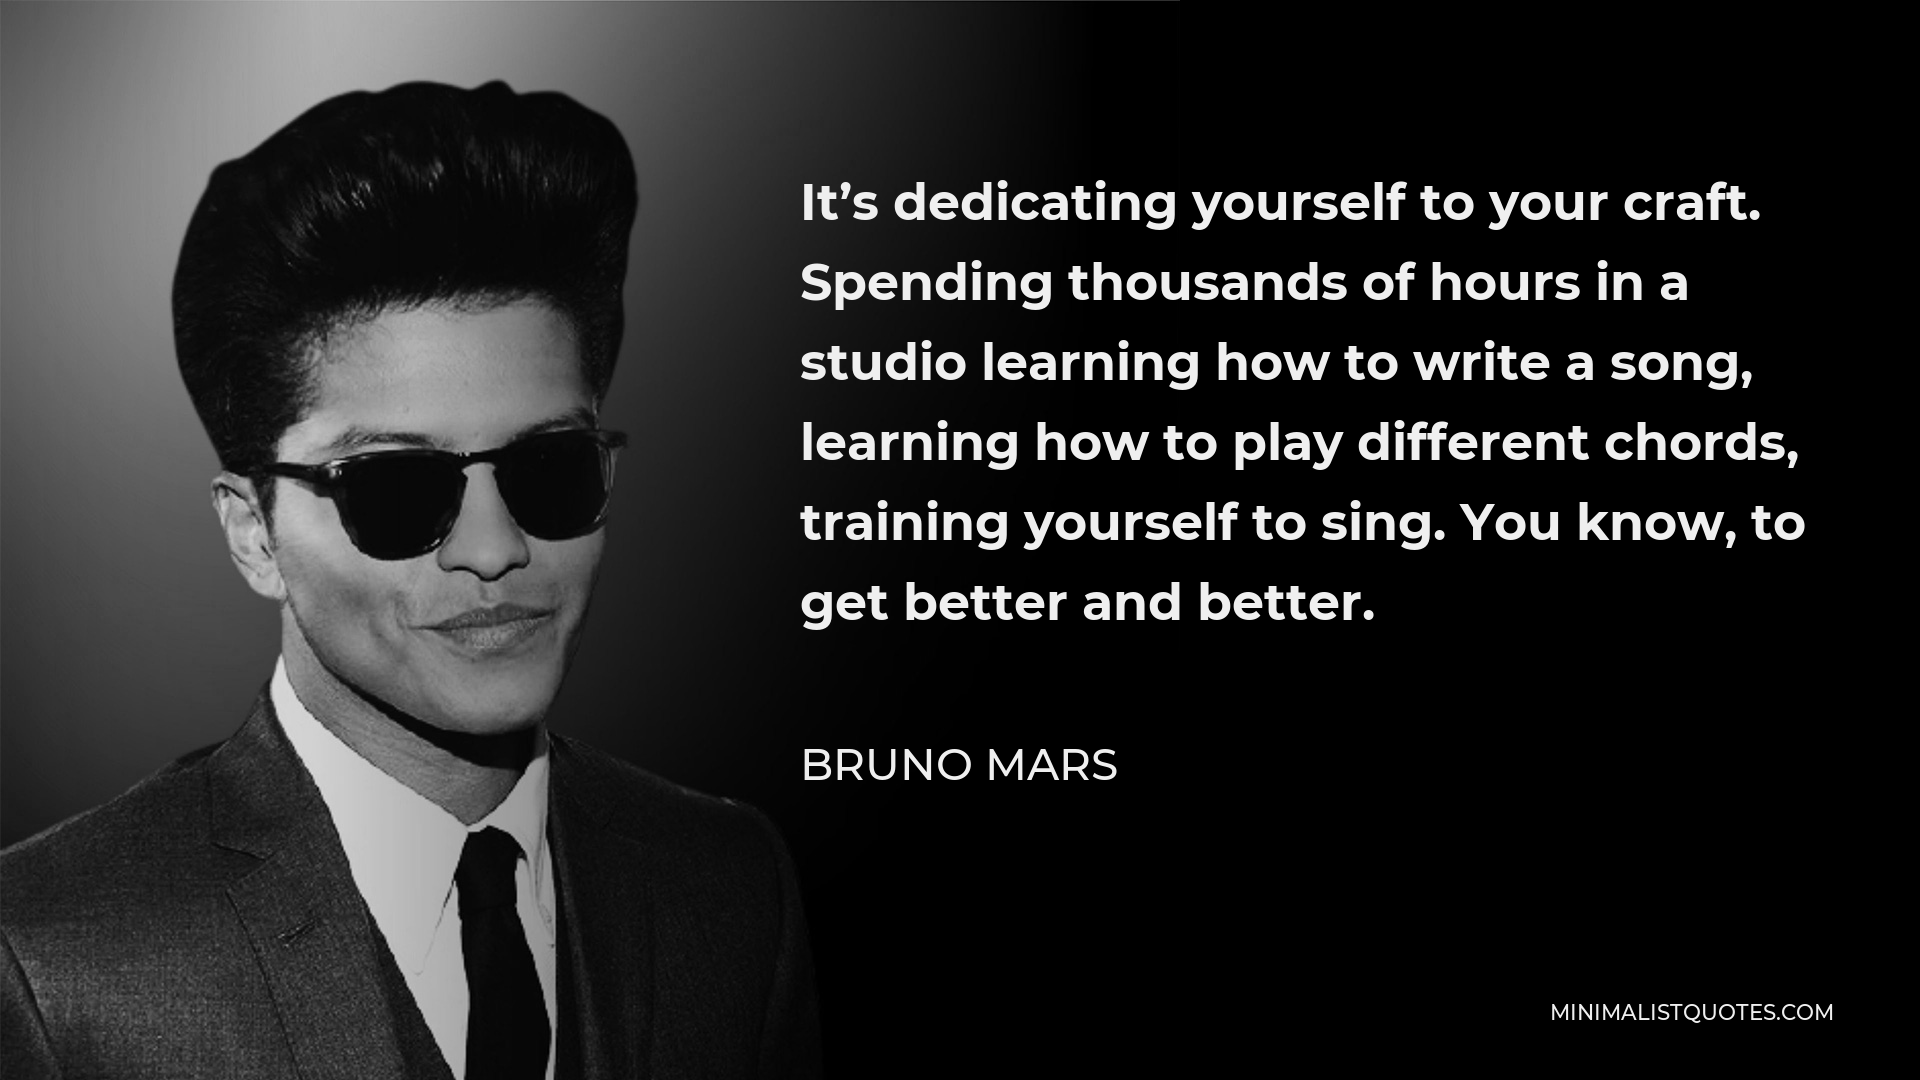 Bruno Mars Quote - It’s dedicating yourself to your craft. Spending thousands of hours in a studio learning how to write a song, learning how to play different chords, training yourself to sing. You know, to get better and better.